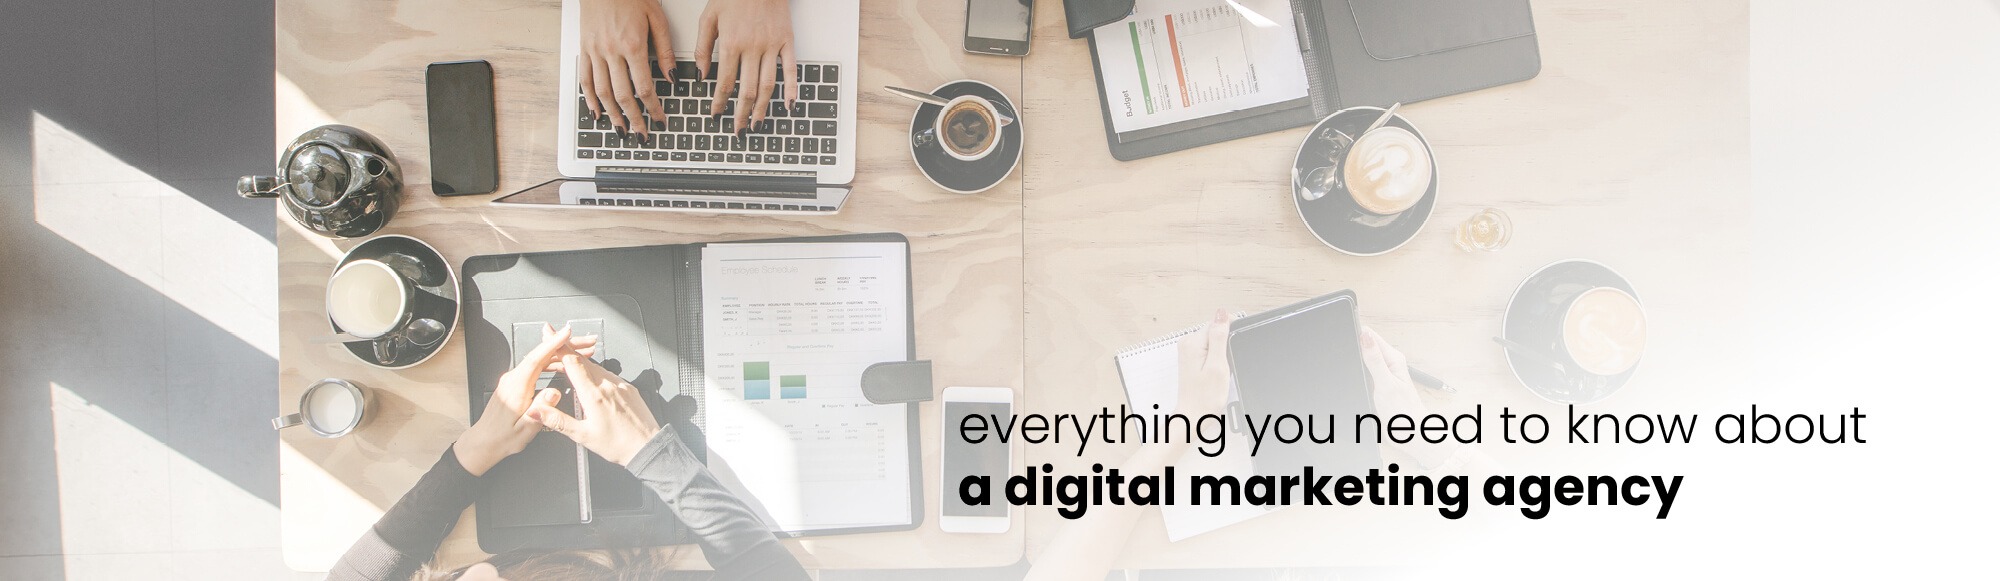 Digital Marketing Agencies - What Do You Need to Know?